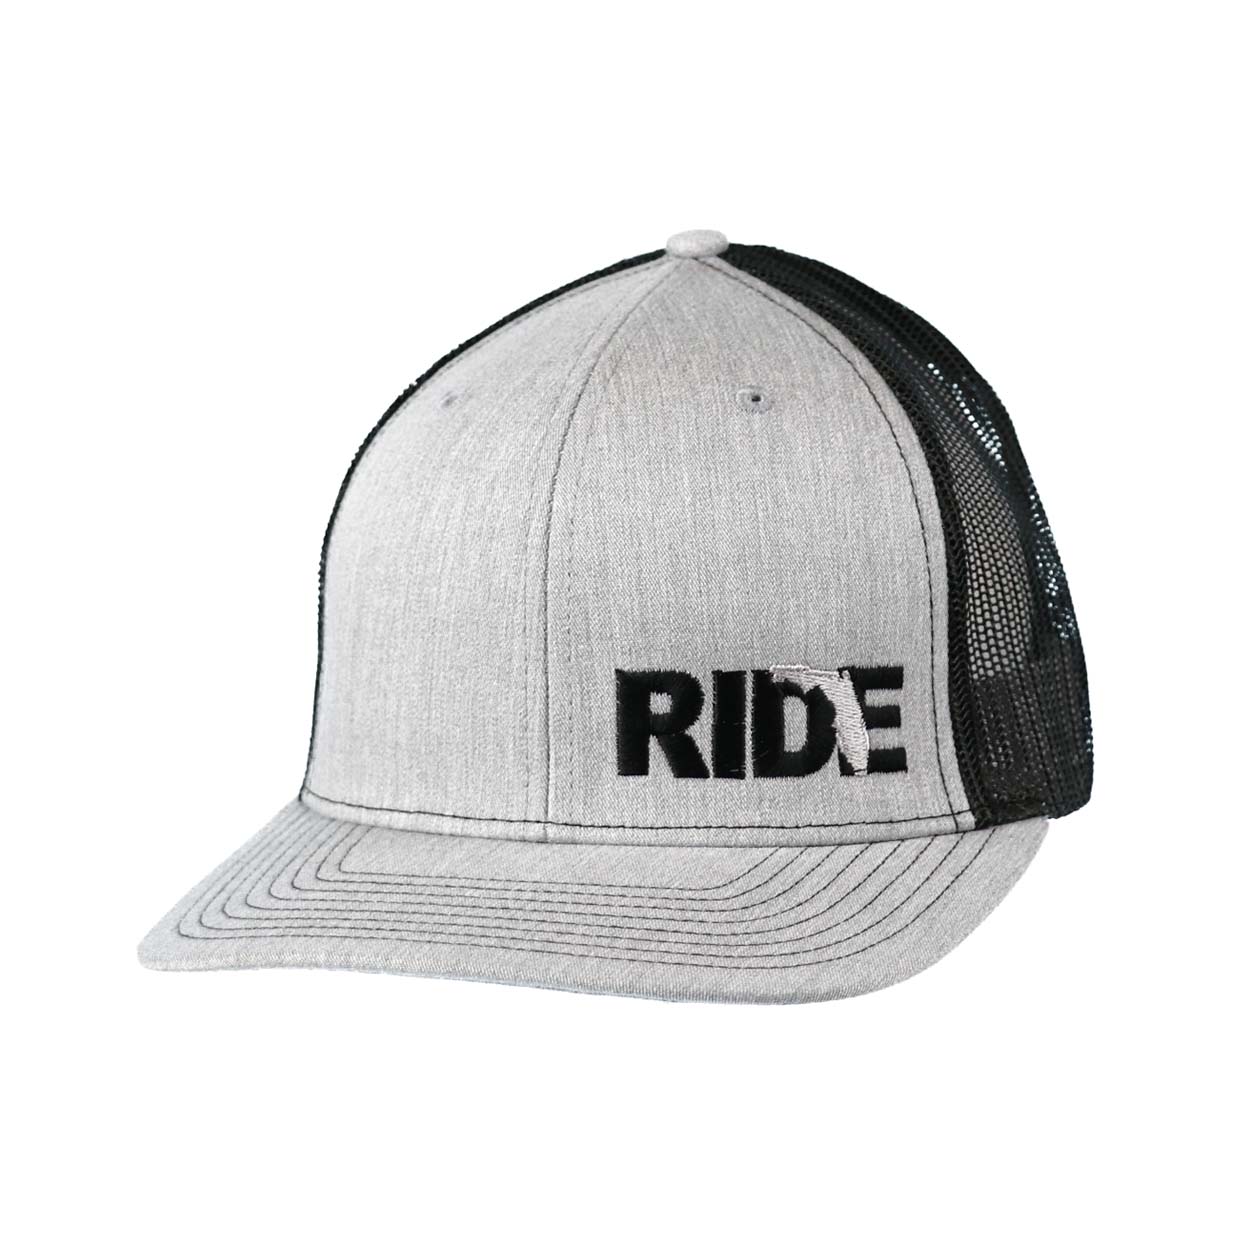 Ride Florida Classic Pro Night Out Embroidered Snapback Trucker Hat Heather Gray/Black